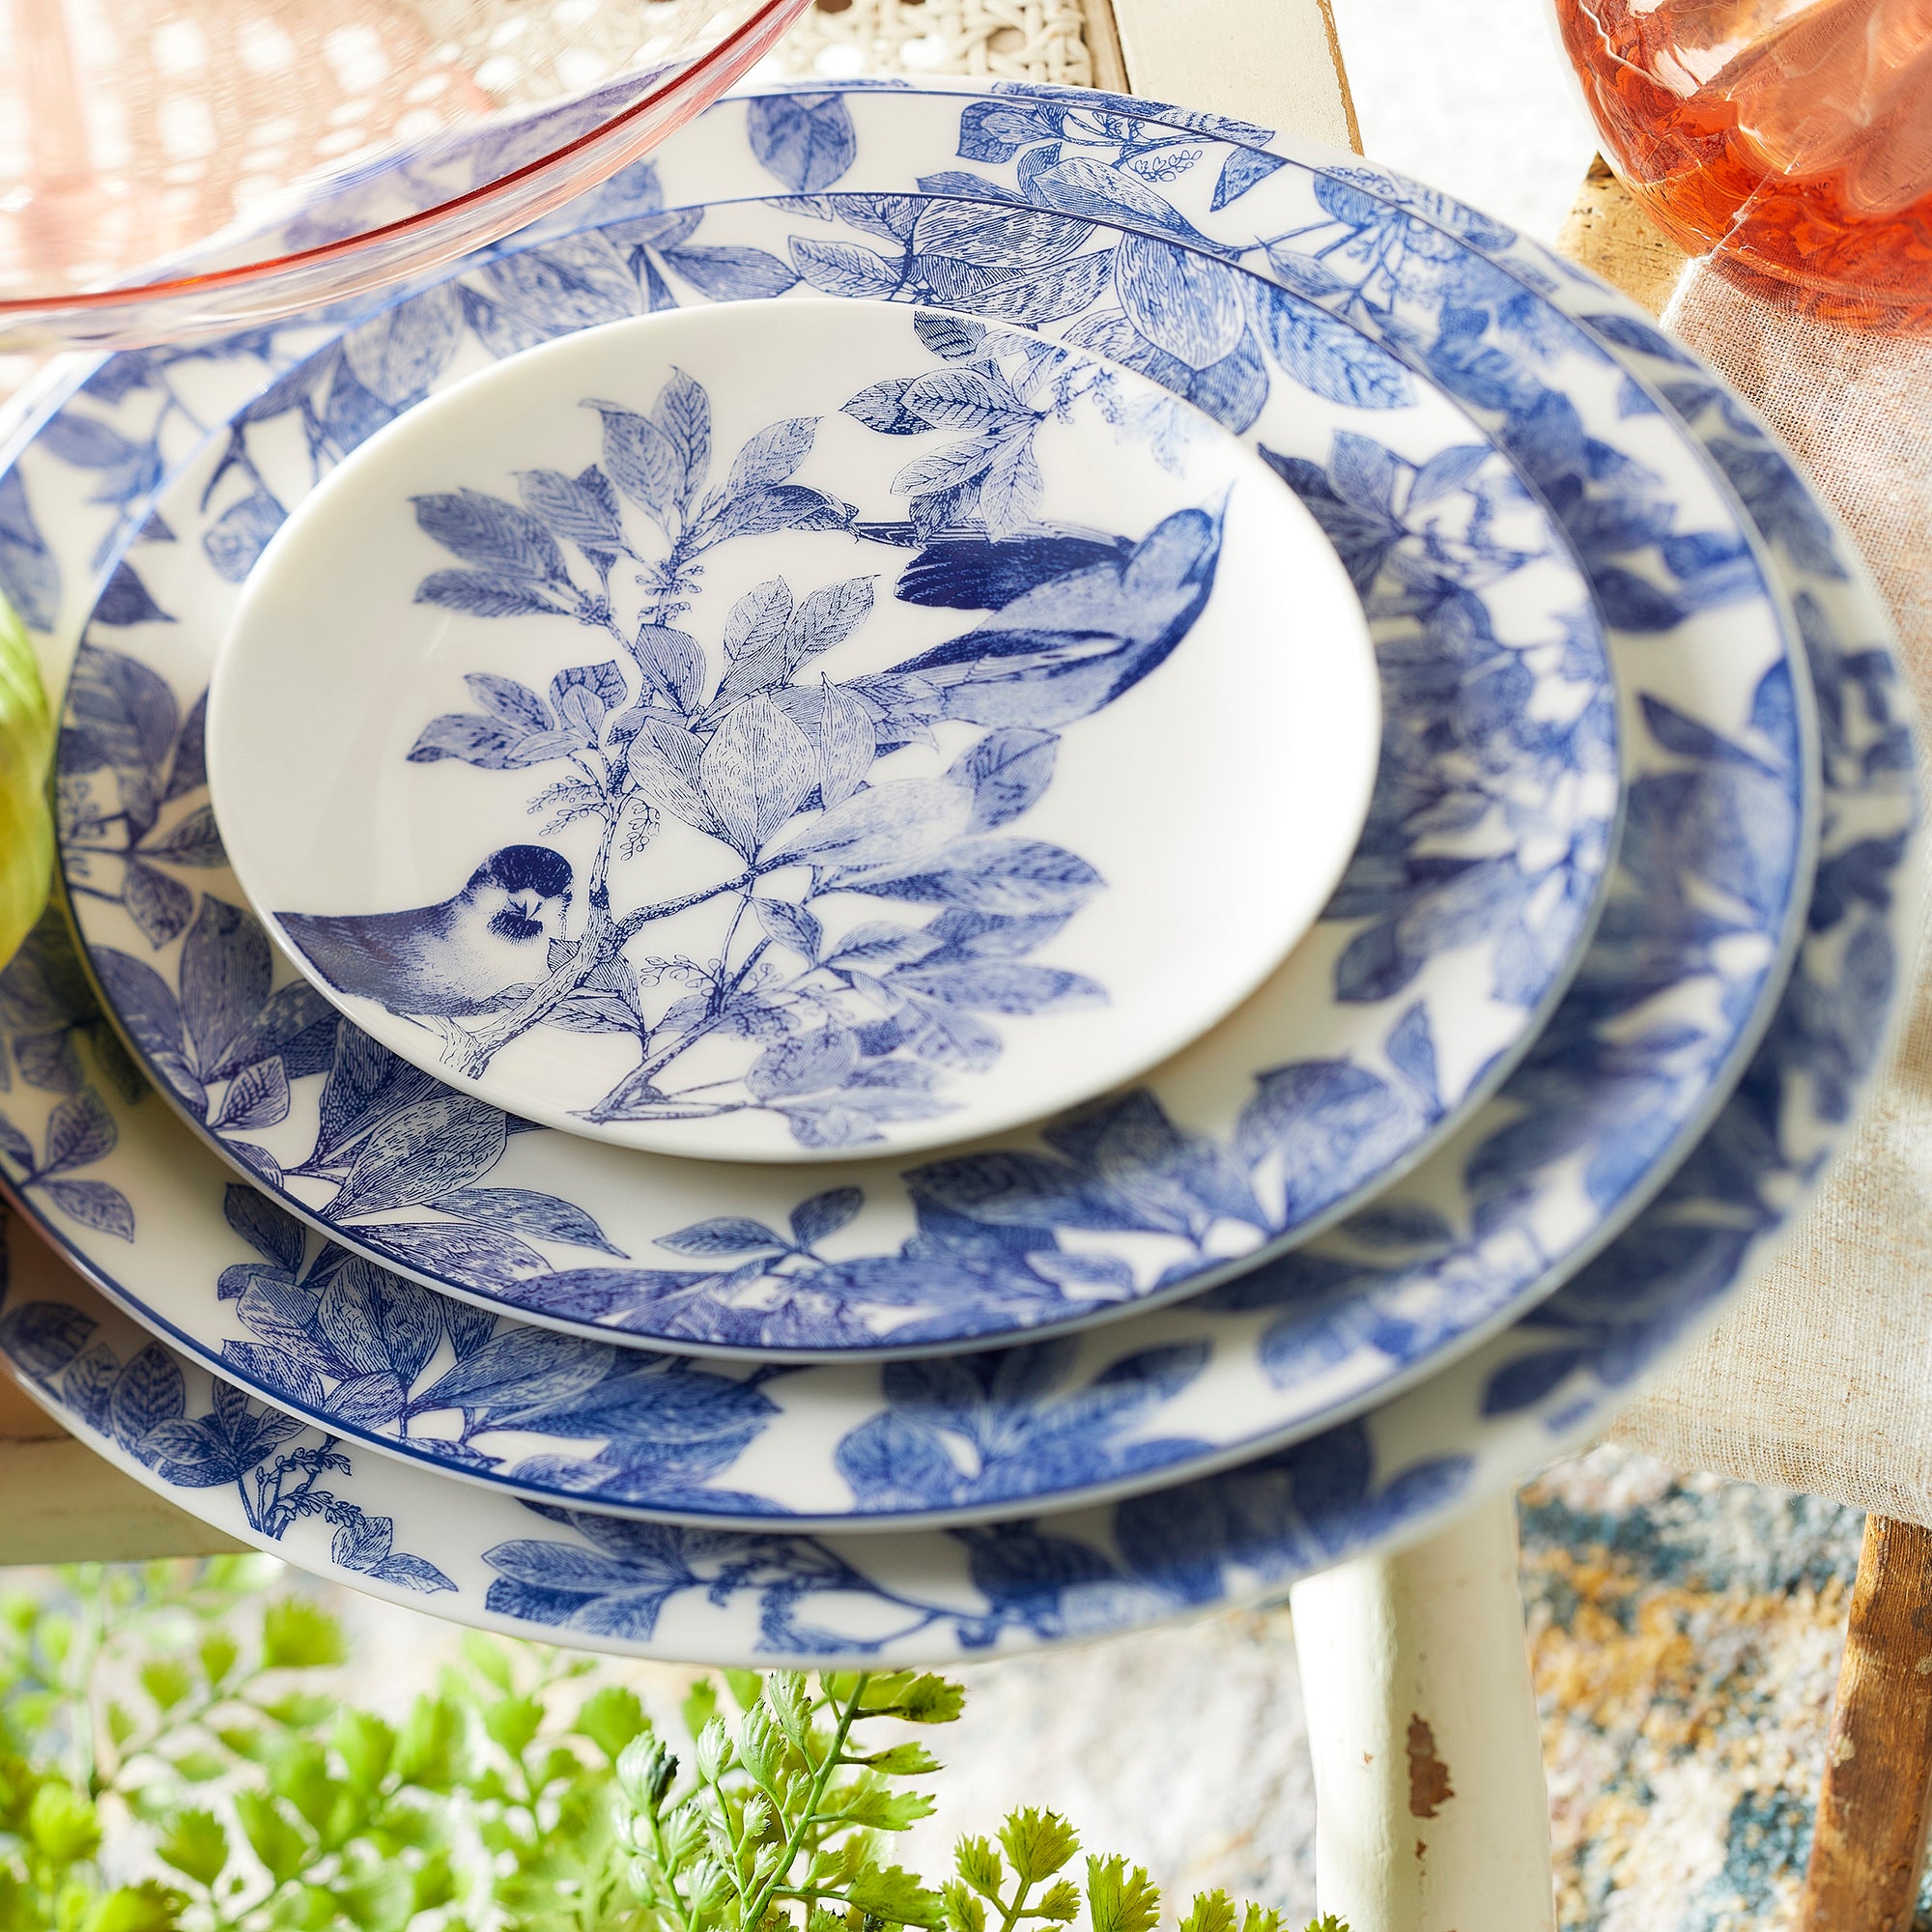 Four Caskata Artisanal Home Arbor Blue Birds Small Plates, with a blue design of birds and botanical details on leafy branches, crafted from heirloom-quality porcelain.